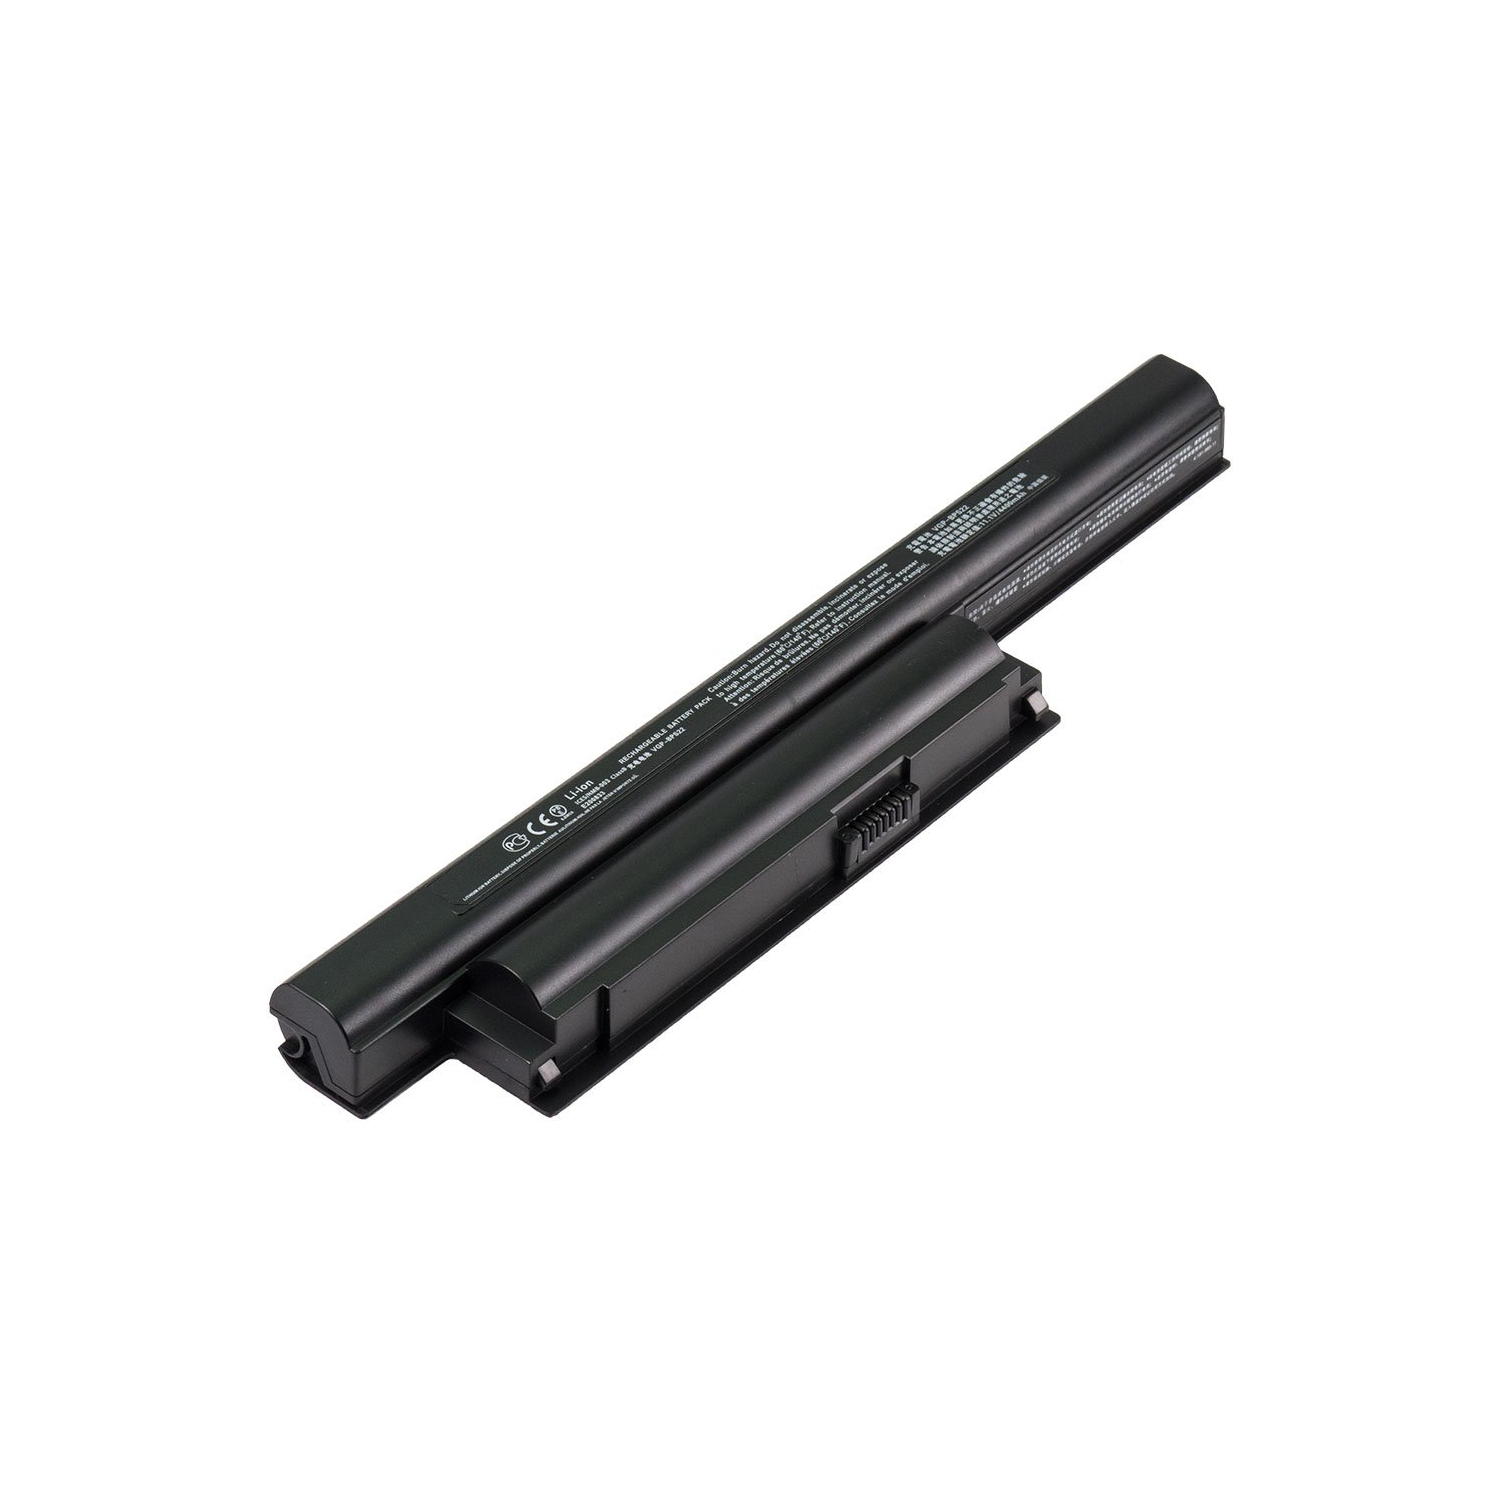 Laptop Battery Replacement for Sony VAIO VPC-EA26FF/P, VGP-BPL22, VGP-BPS22, VGP-BPS22/A, VGP-BPS22A